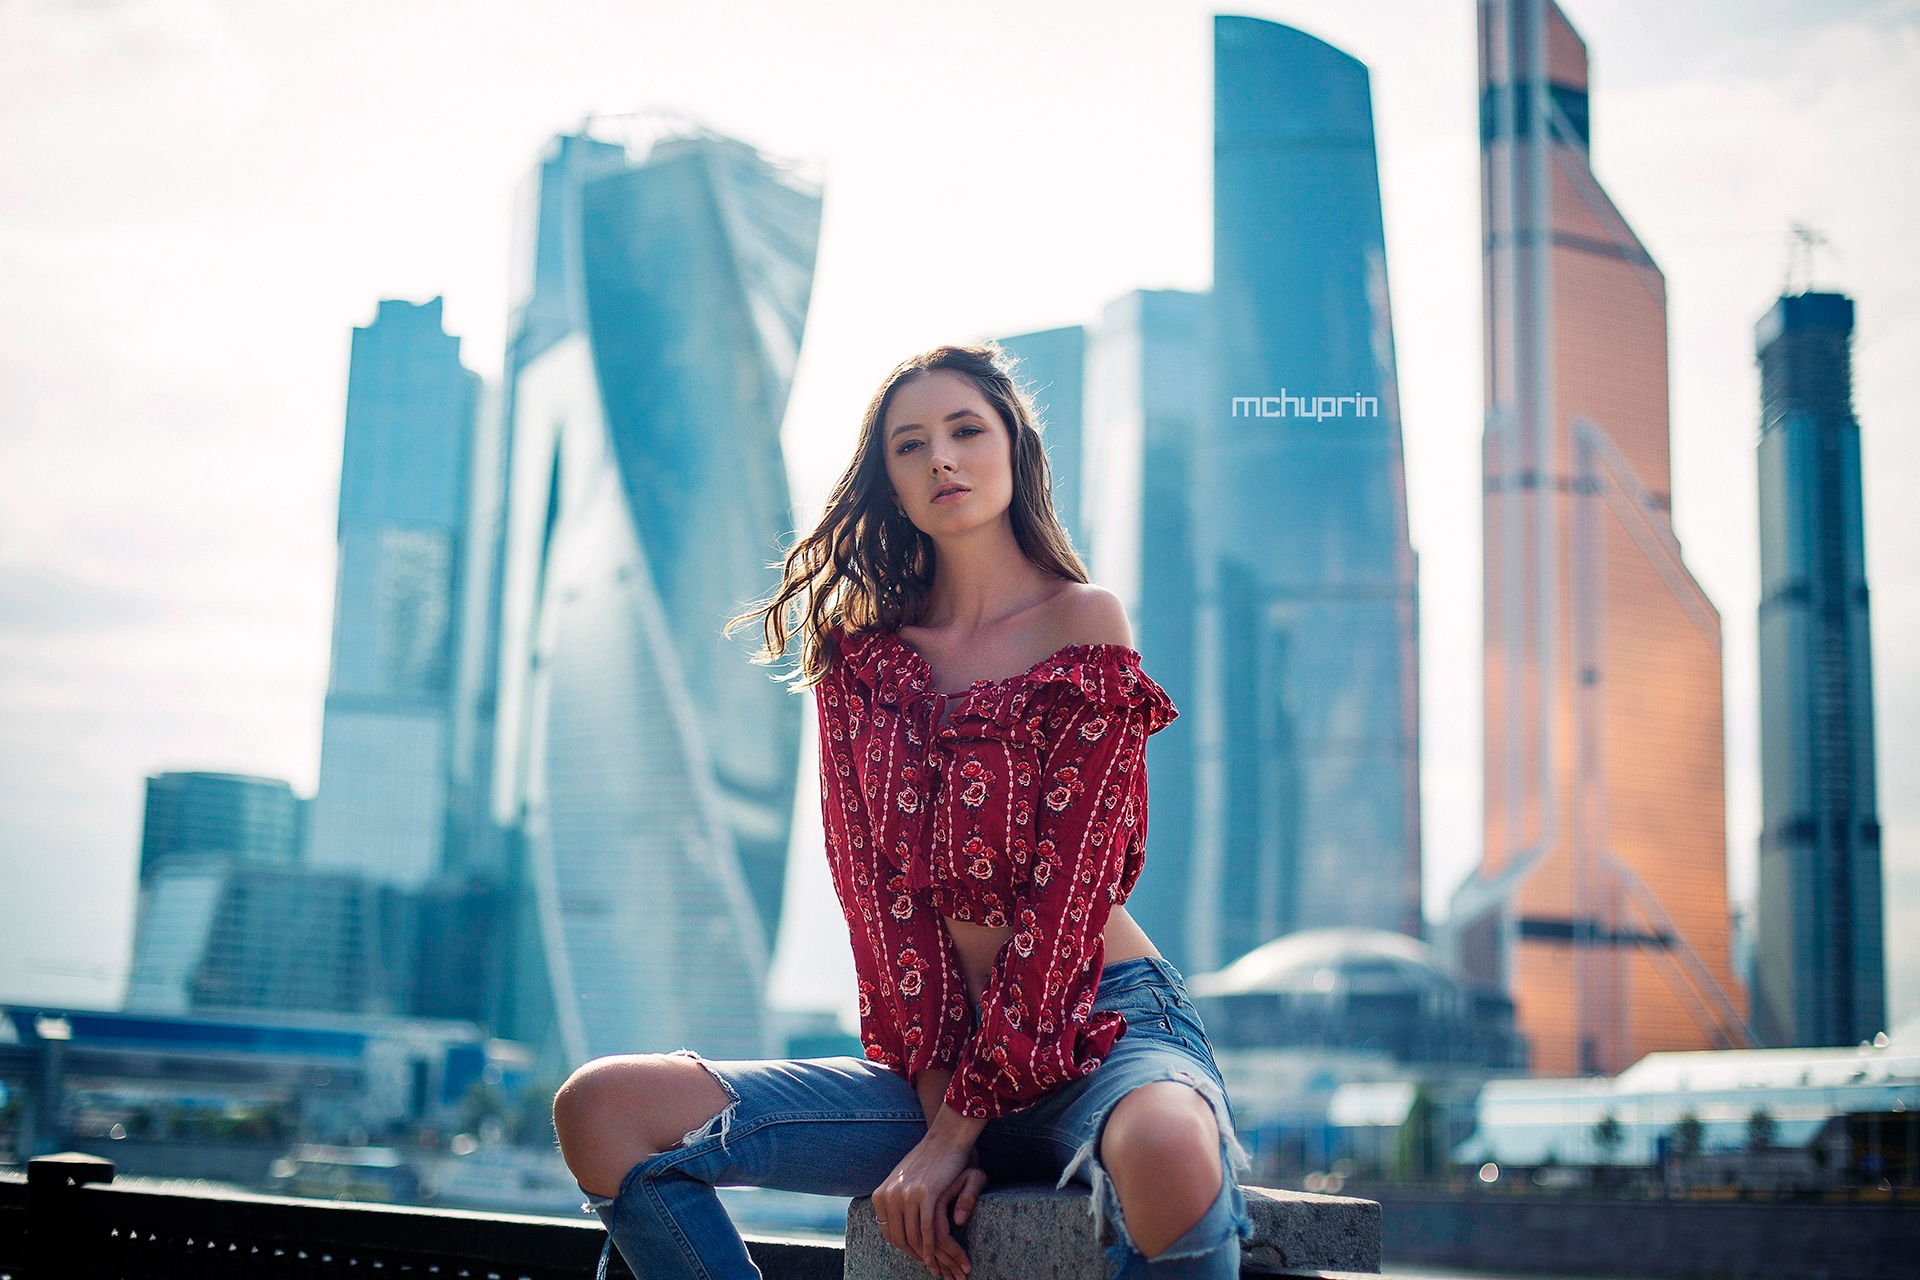 People 1920x1280 Disha Shemetova women cityscape torn jeans portrait women outdoors sitting Moscow Maksim Chuprin watermarked Russia looking at viewer urban torn clothes long hair model